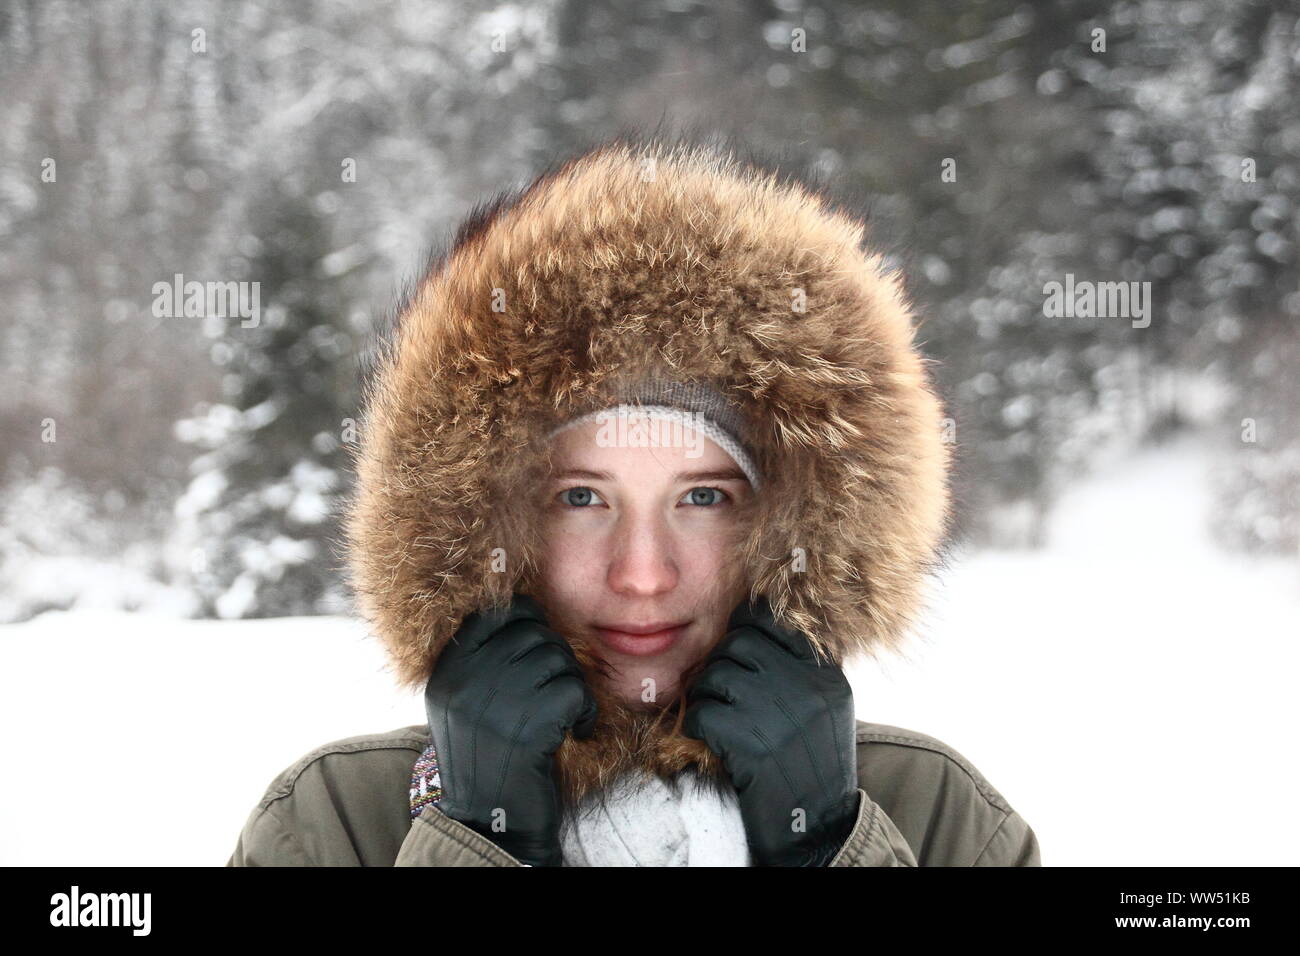 Young woman with fur hood in wintry landscape, close Stock Photo